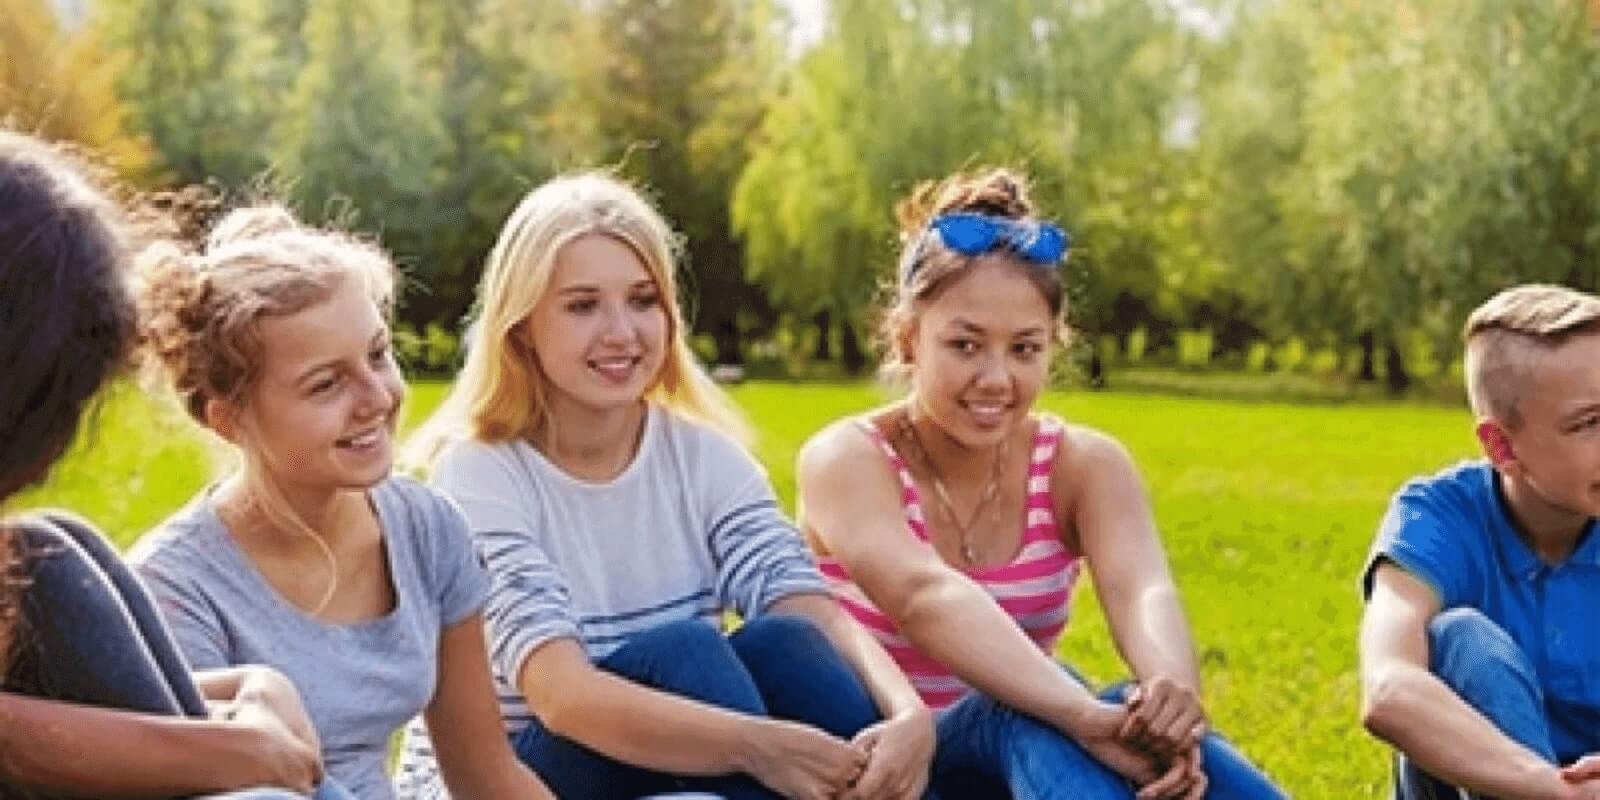 Group of teens sitting on a grassfield smiling at each other